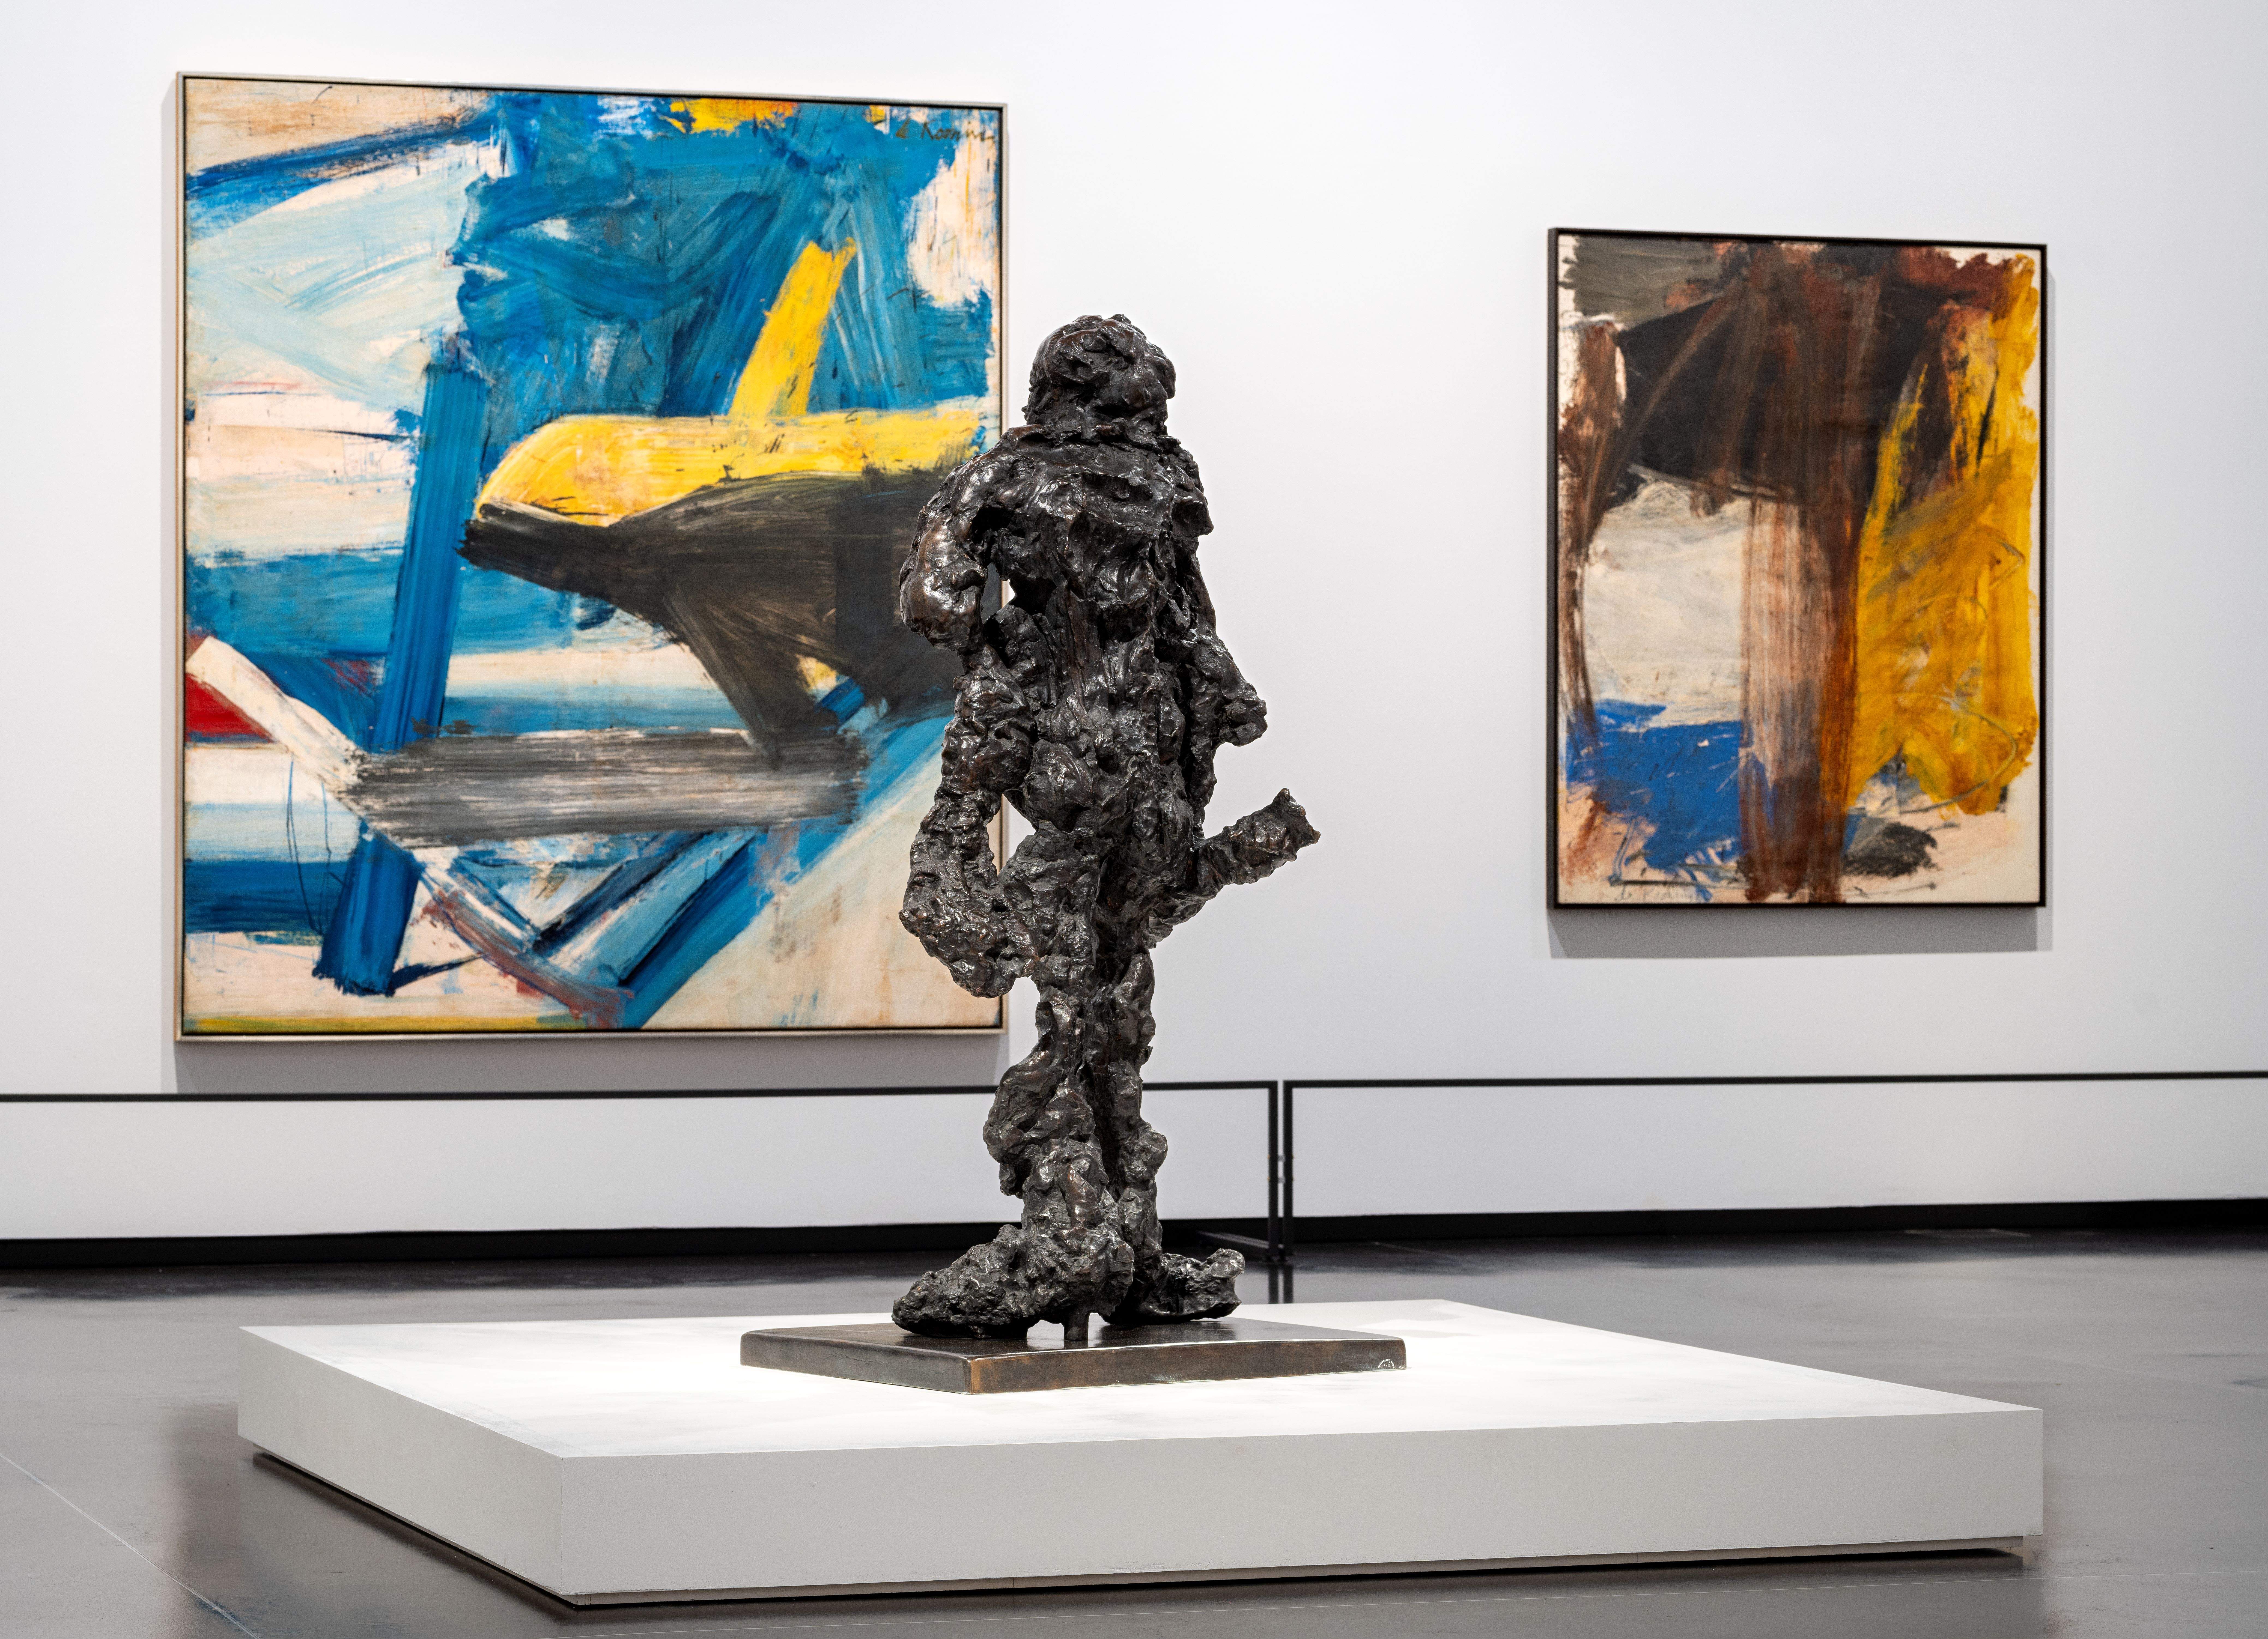 9.-installation-view_willem-de-kooning-and-italy_gallerie-dell-accademia-venice-2024_c-2024-the-willem-de-kooning-foundation-siae_photo-by-david-levene-2024..jpg